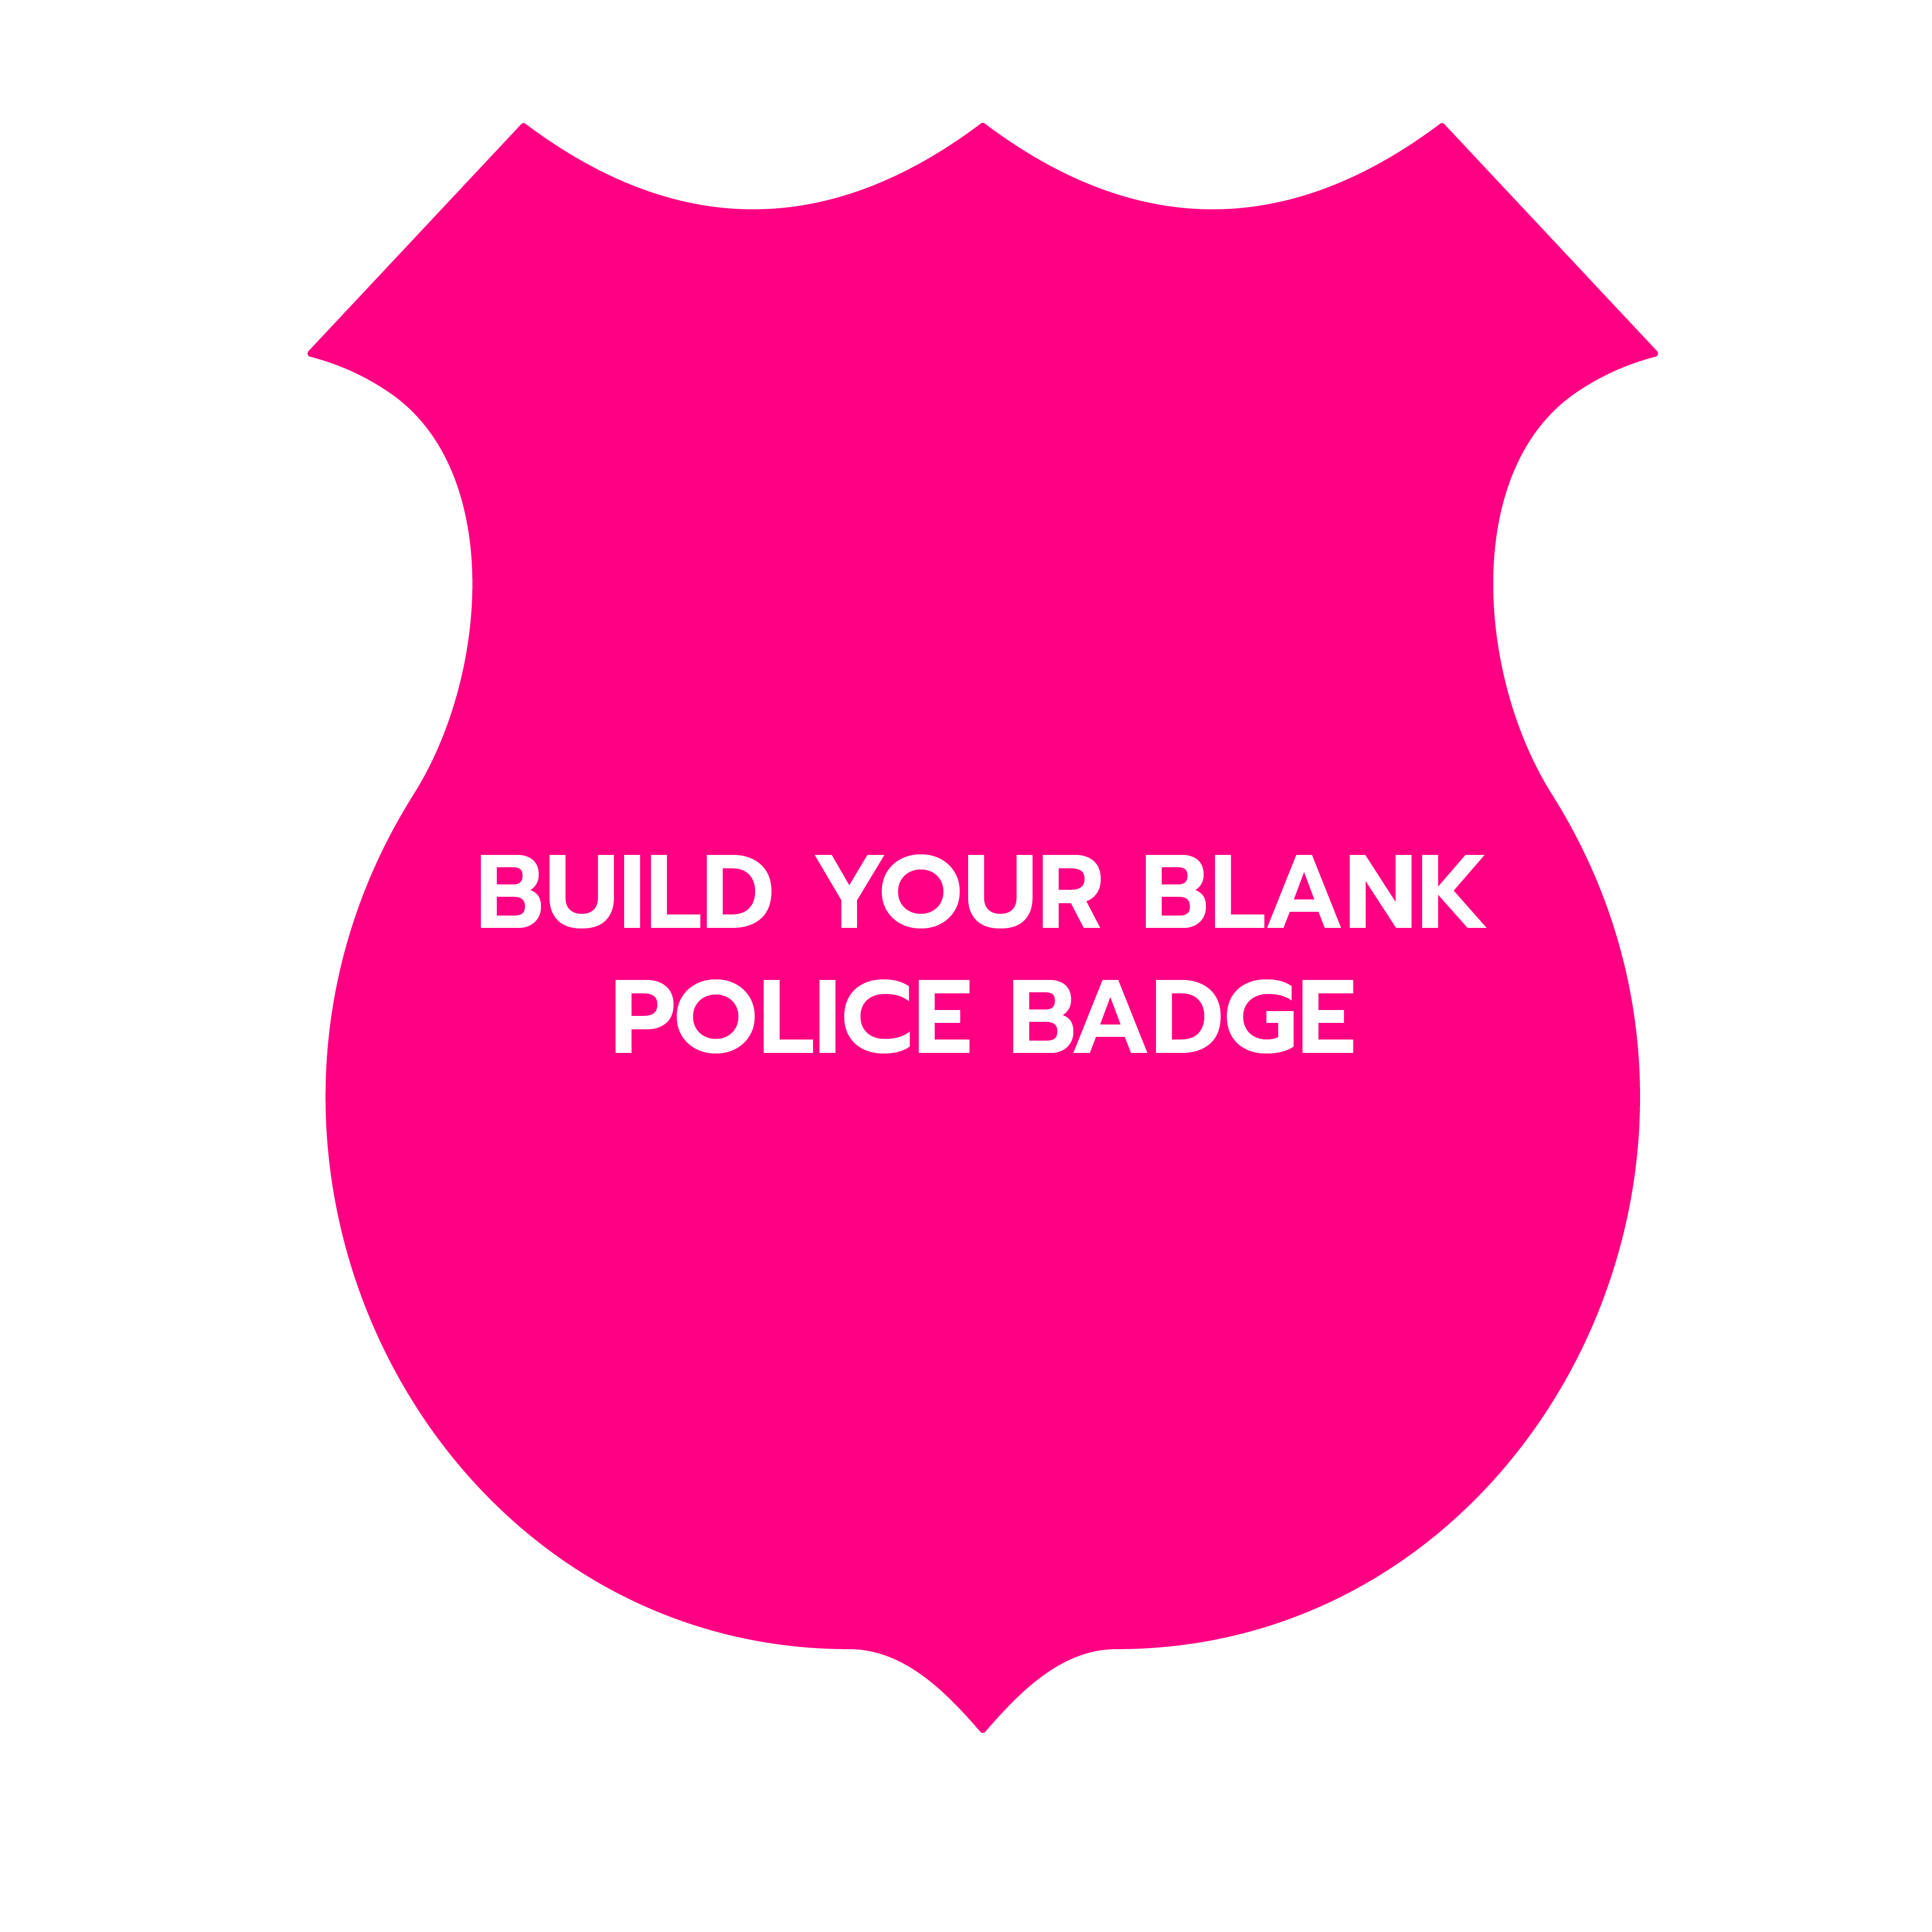 Sign Blanks- Build your Blank